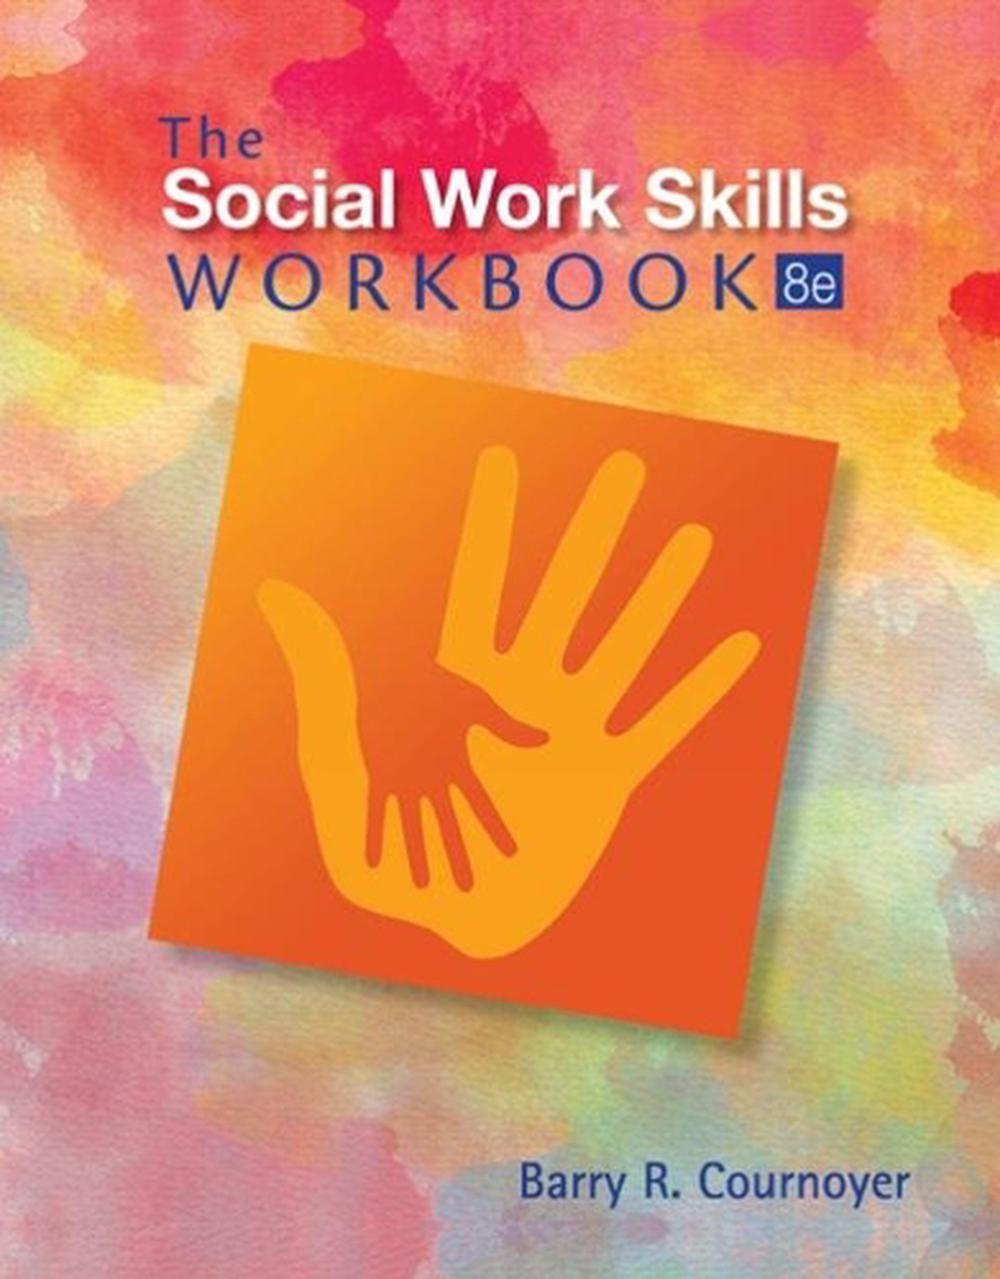 The Social Work Skills Workbook by Barry R. Cournoyer (English